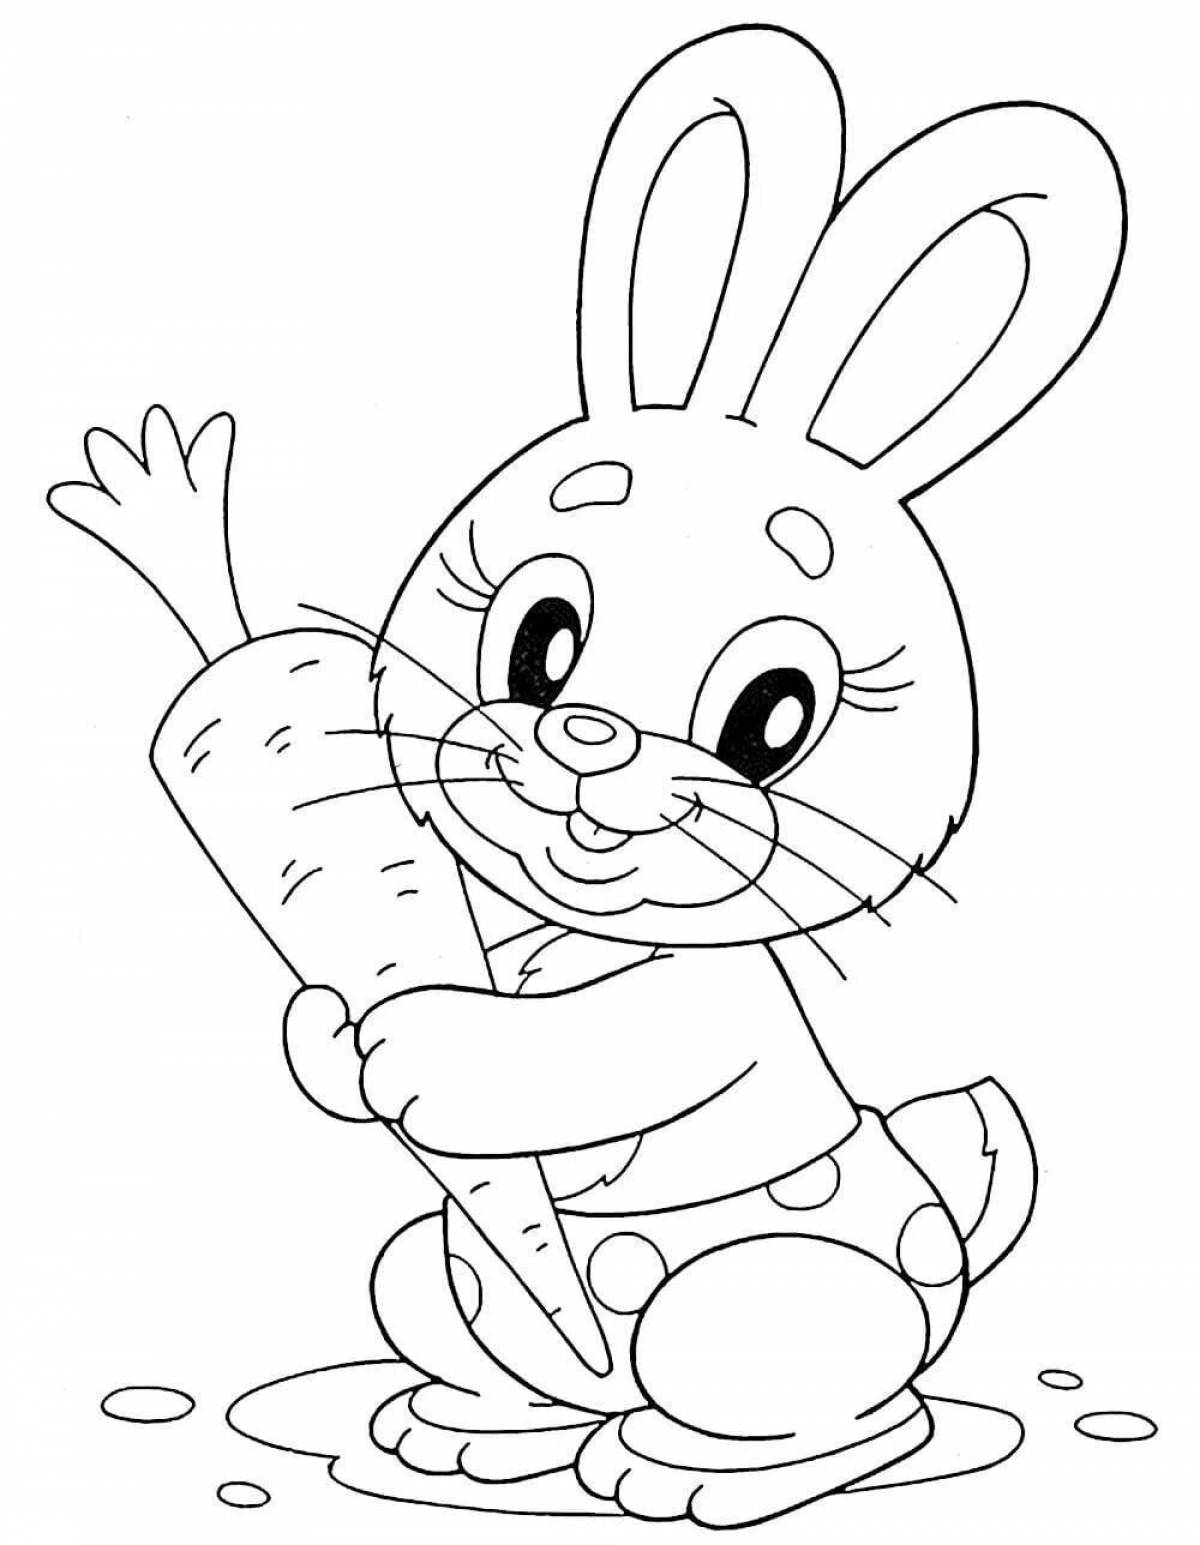 Exquisite coloring book for kids